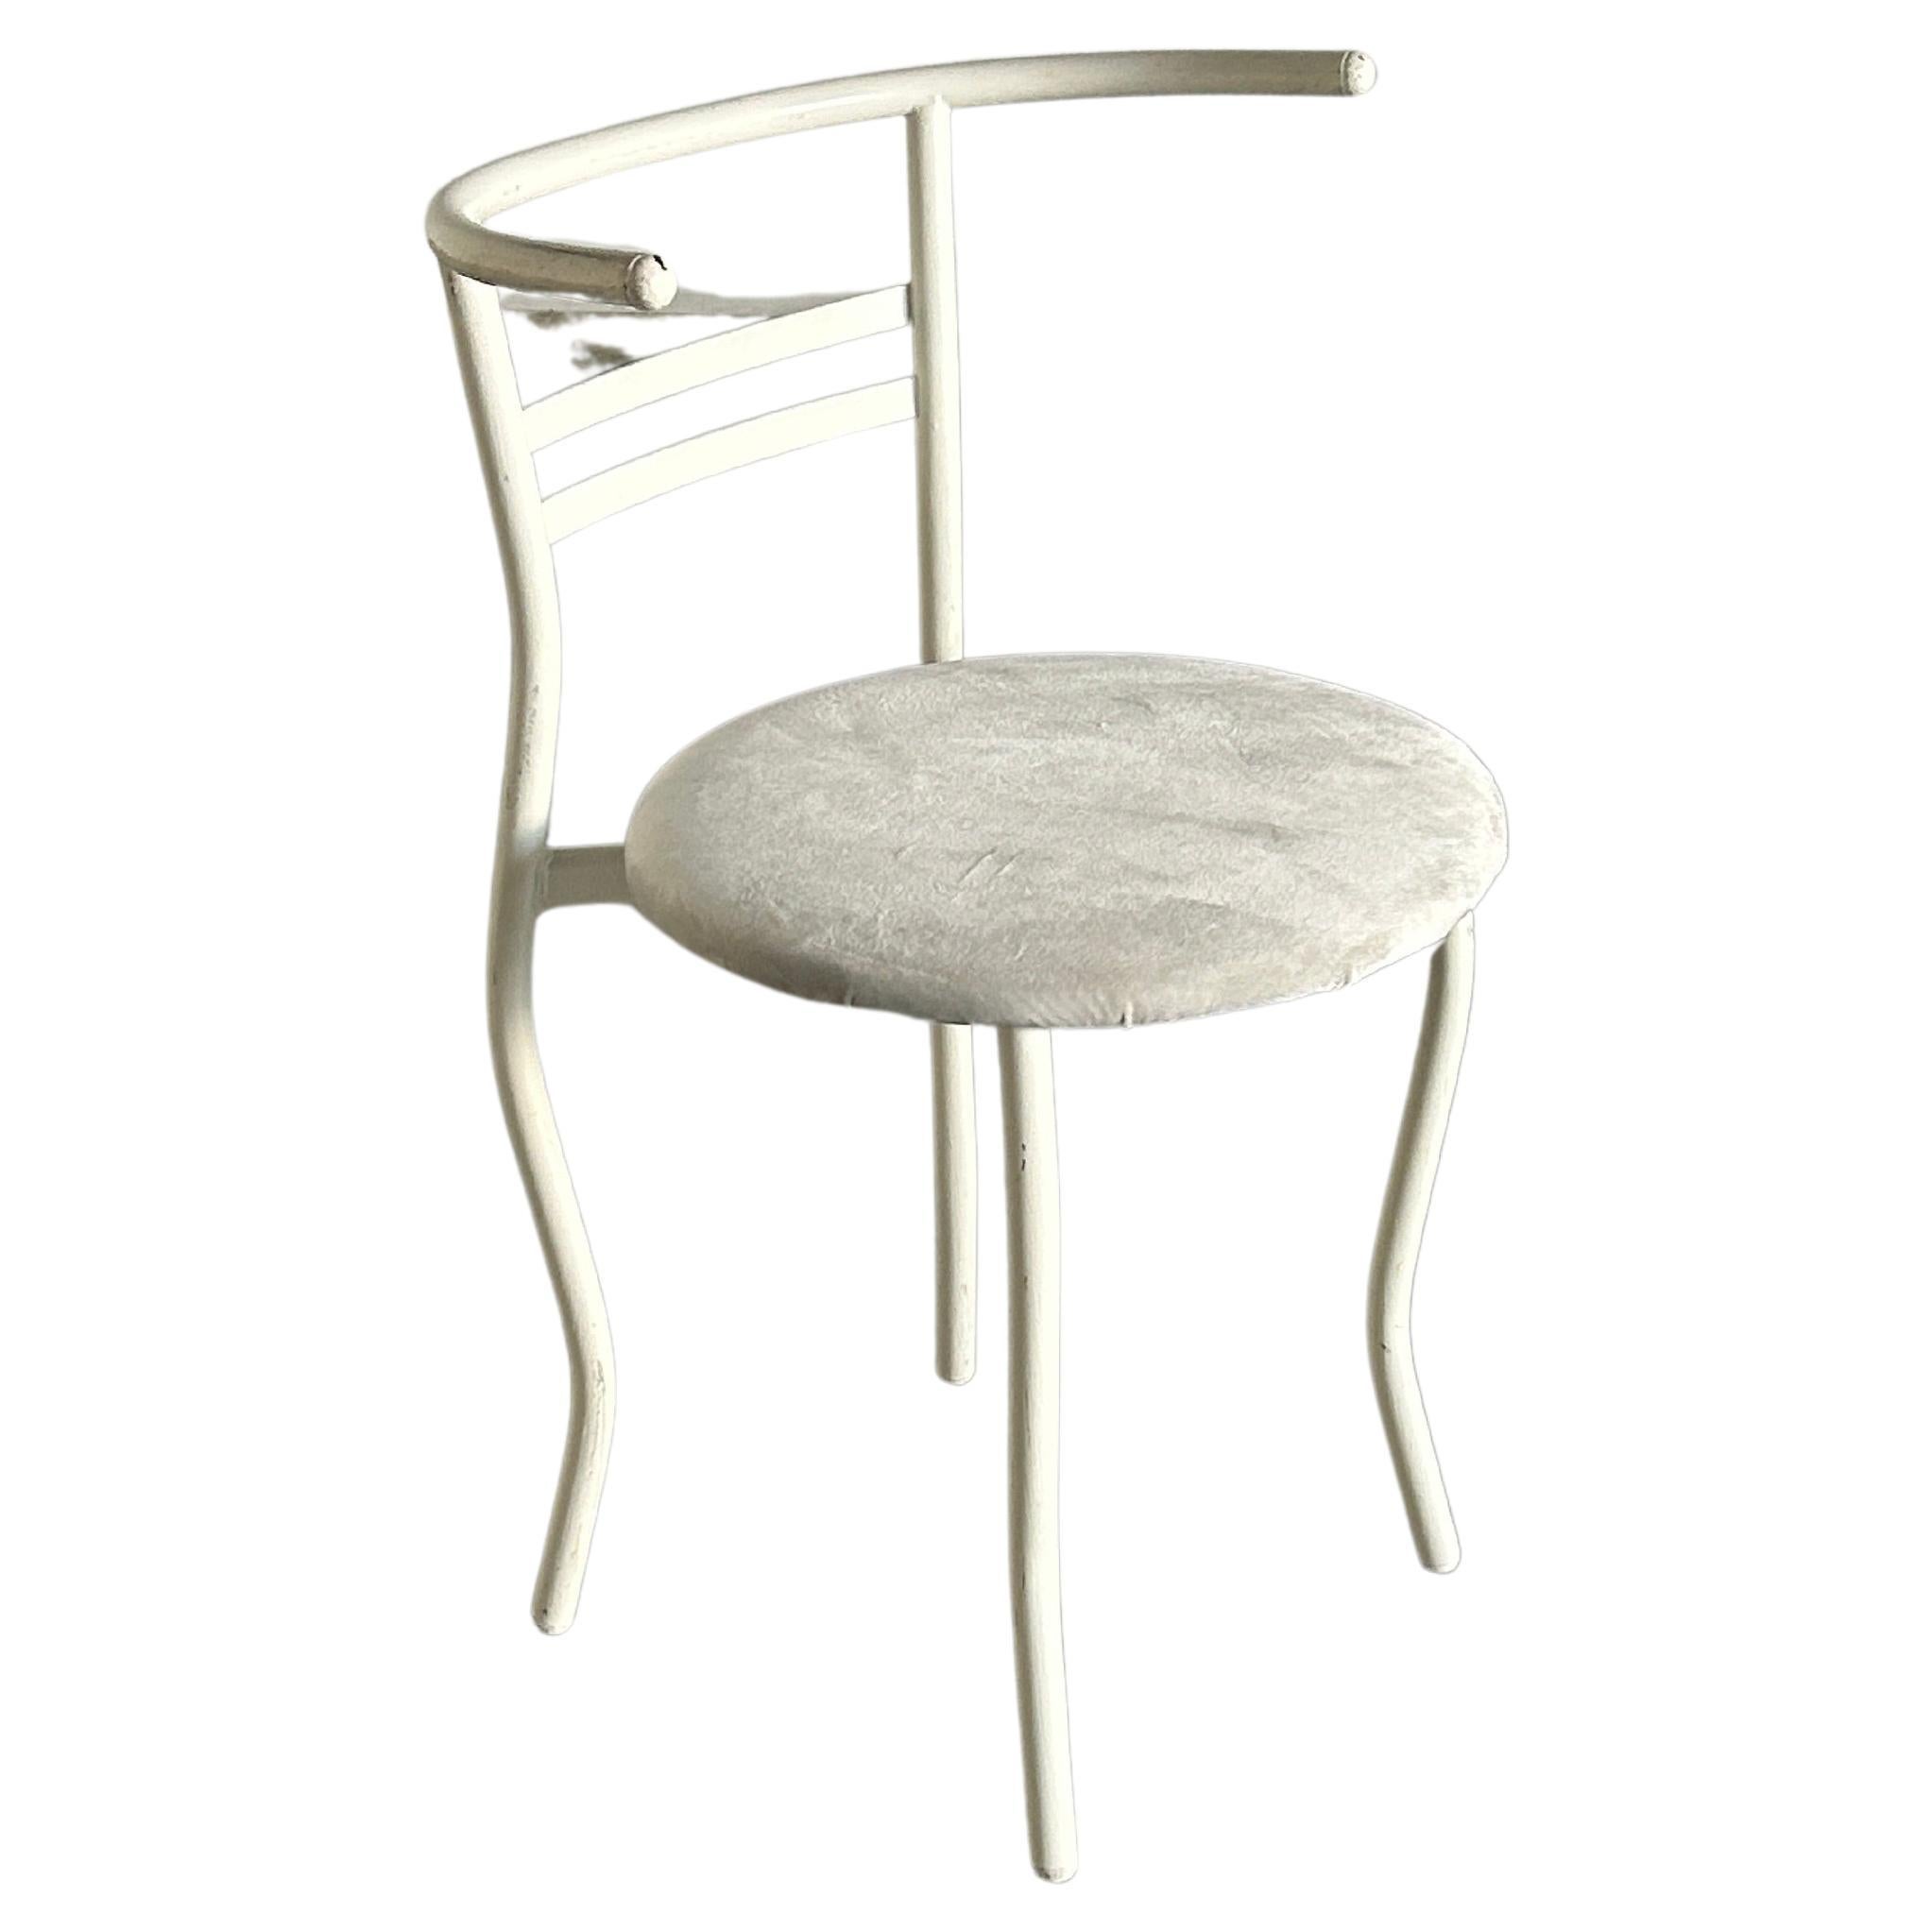 White Postmodern Memphis Style Metal Chair , 1980s Italy